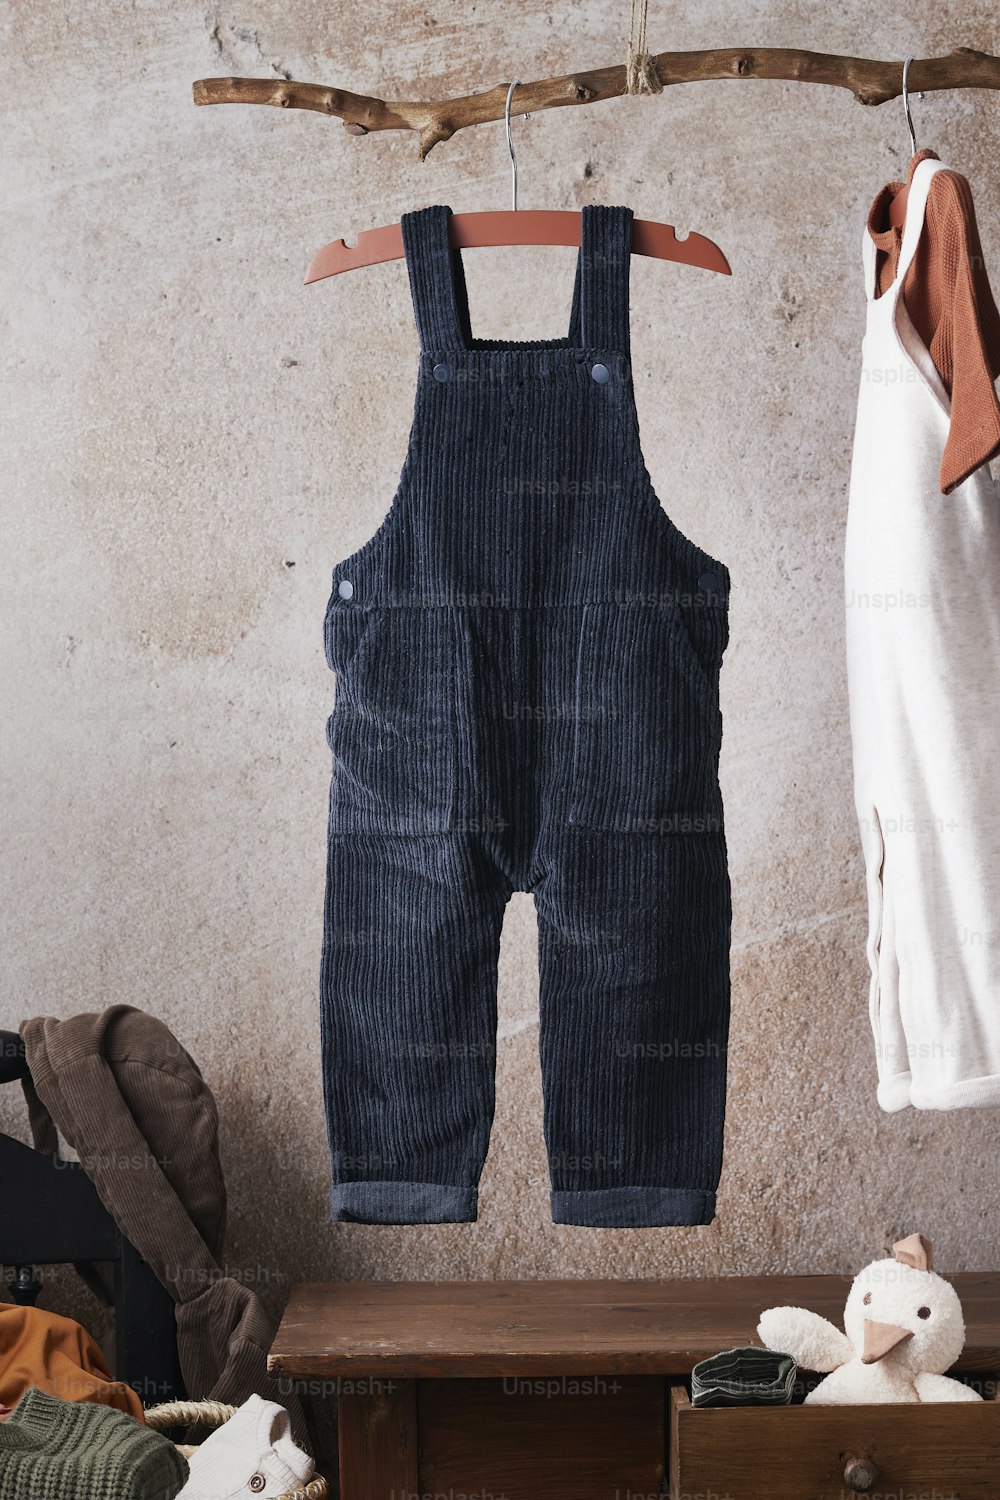 a pair of overalls hanging on a clothes rack